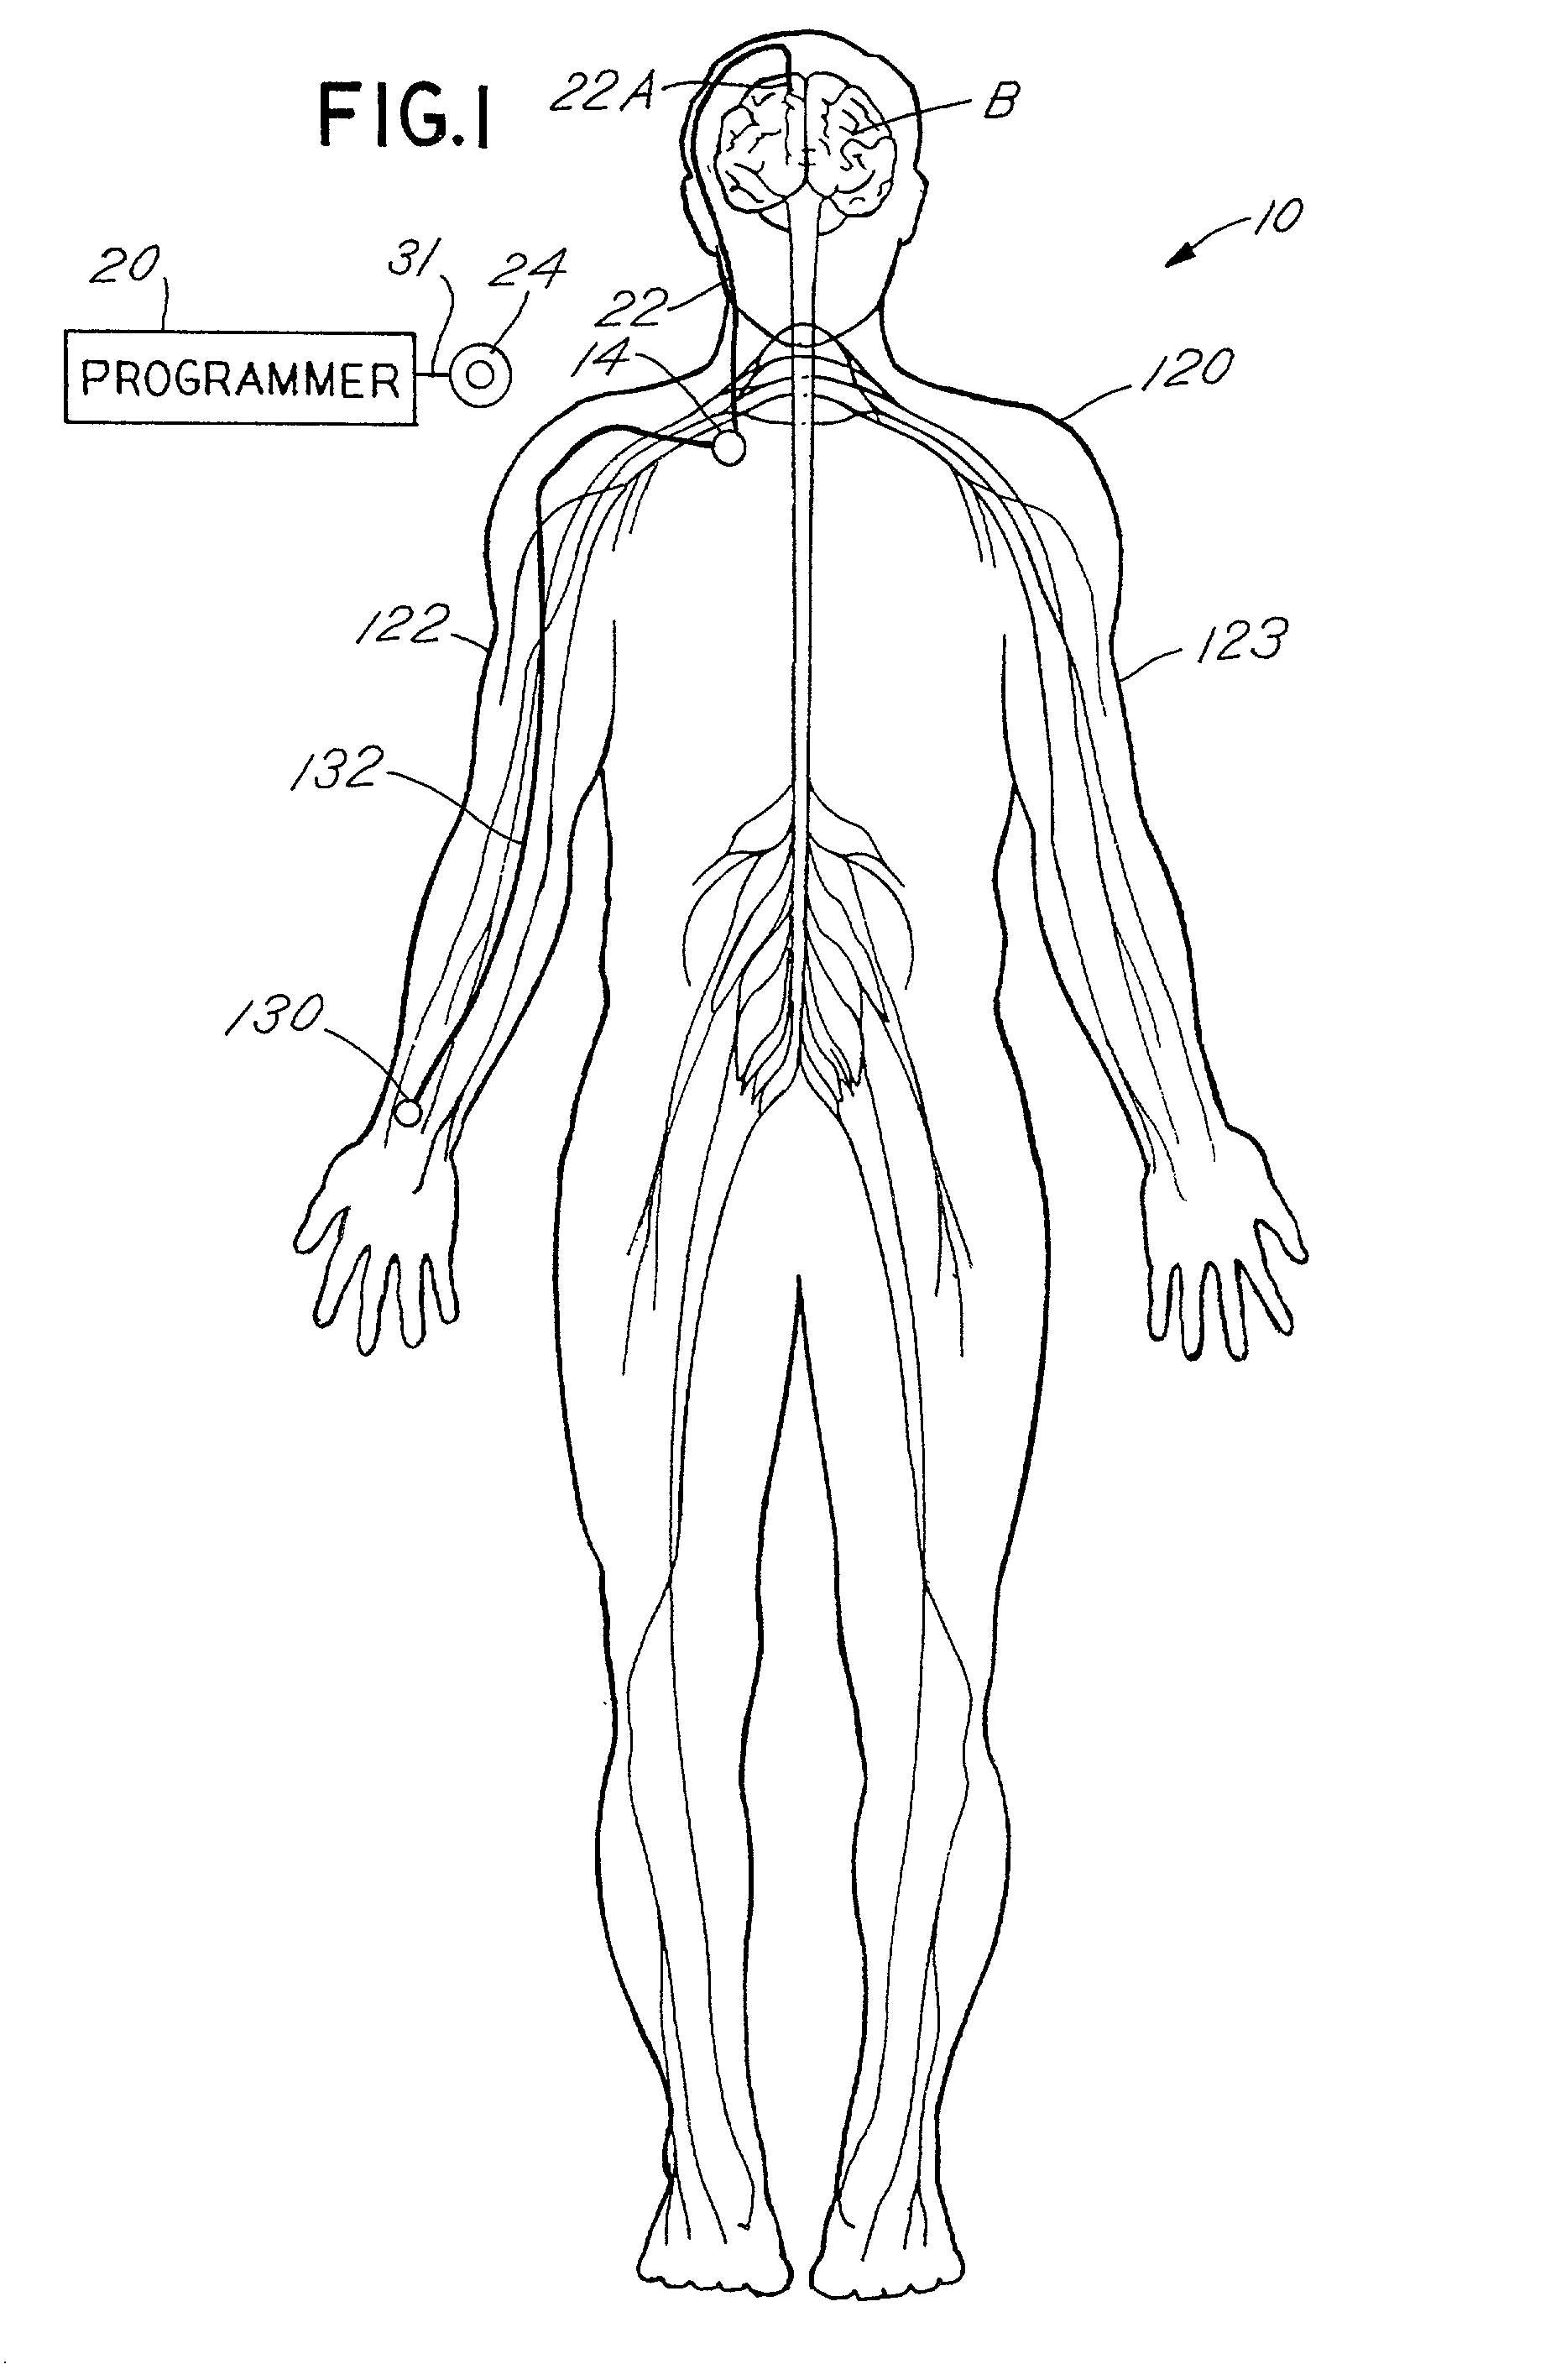 Techniques for selective activation of neurons in the brain, spinal cord parenchyma or peripheral nerve